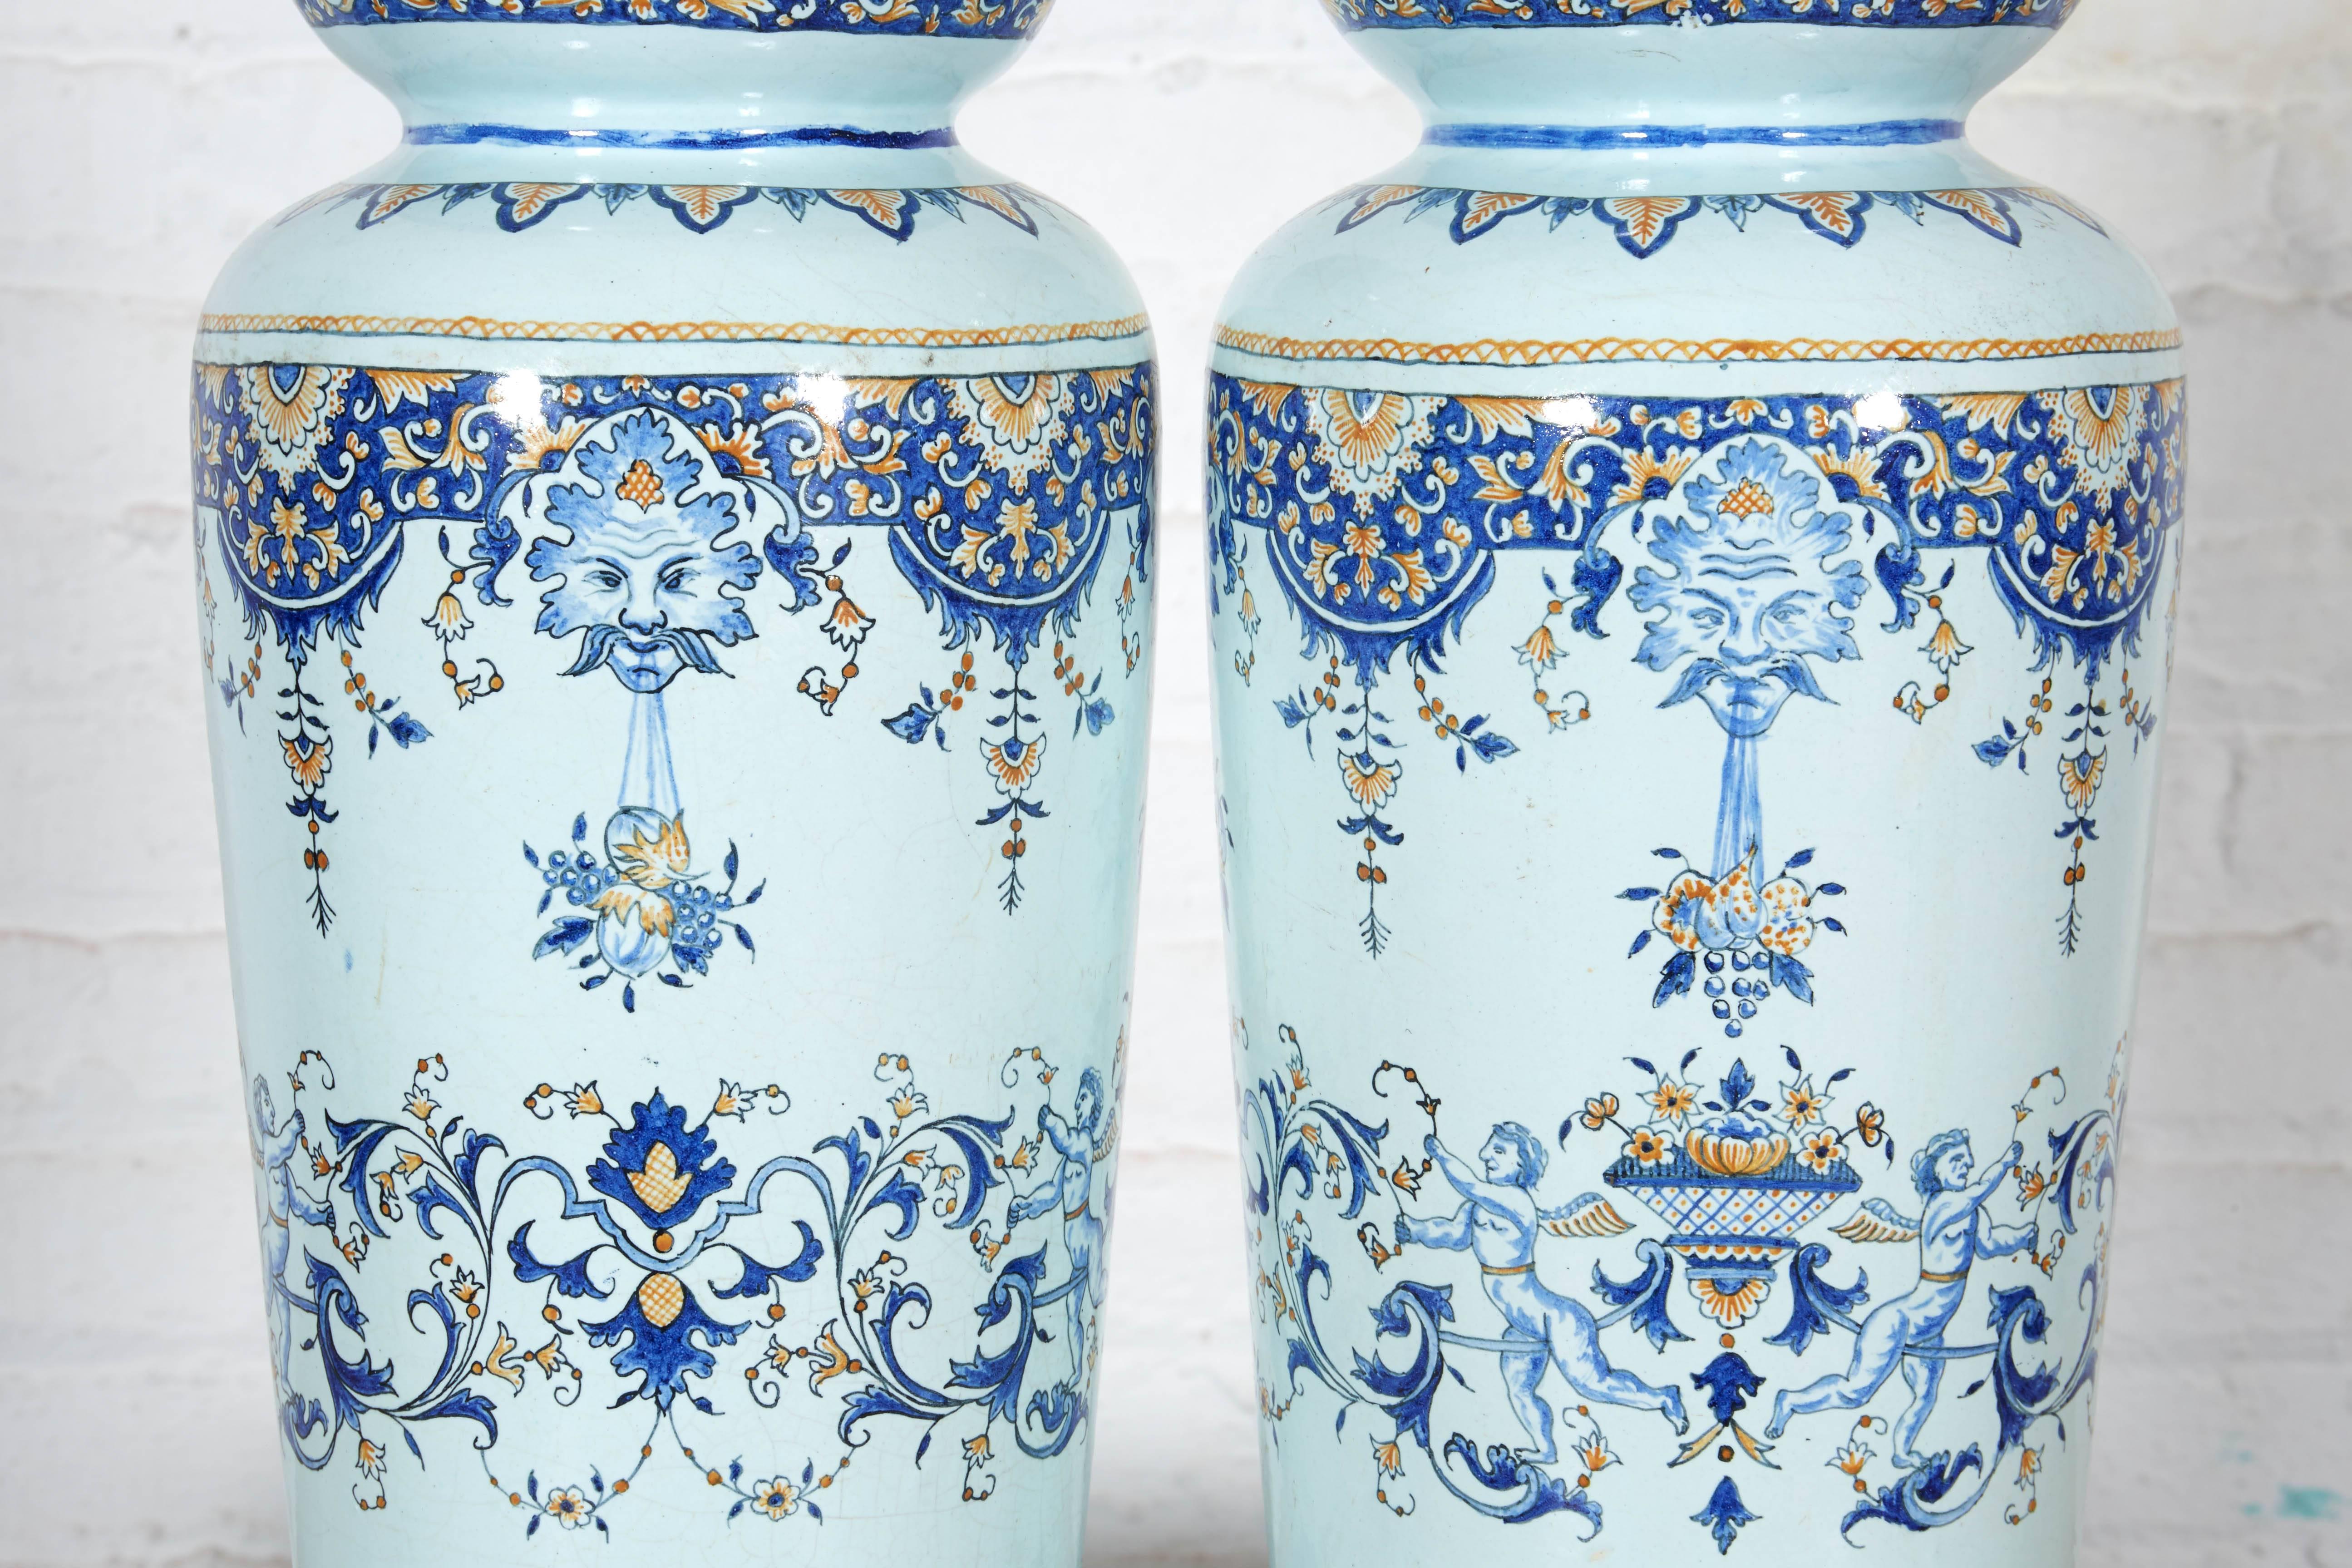 Renaissance Revival Tall Pair of 19th Century French Faience Vases Mounted as Lamps